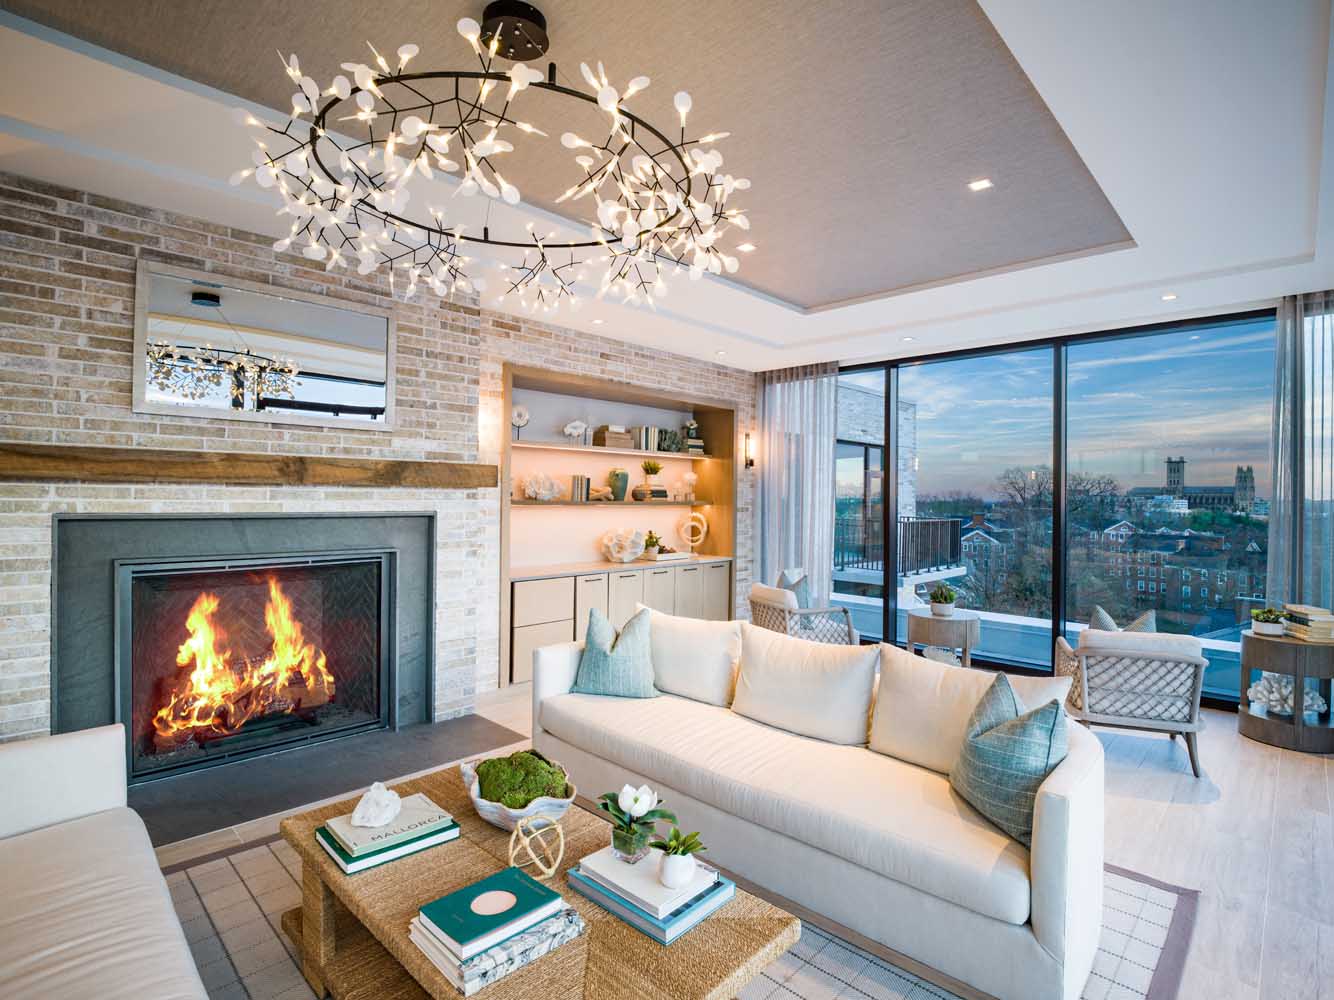 Cozy fireplace nooks with scenic views